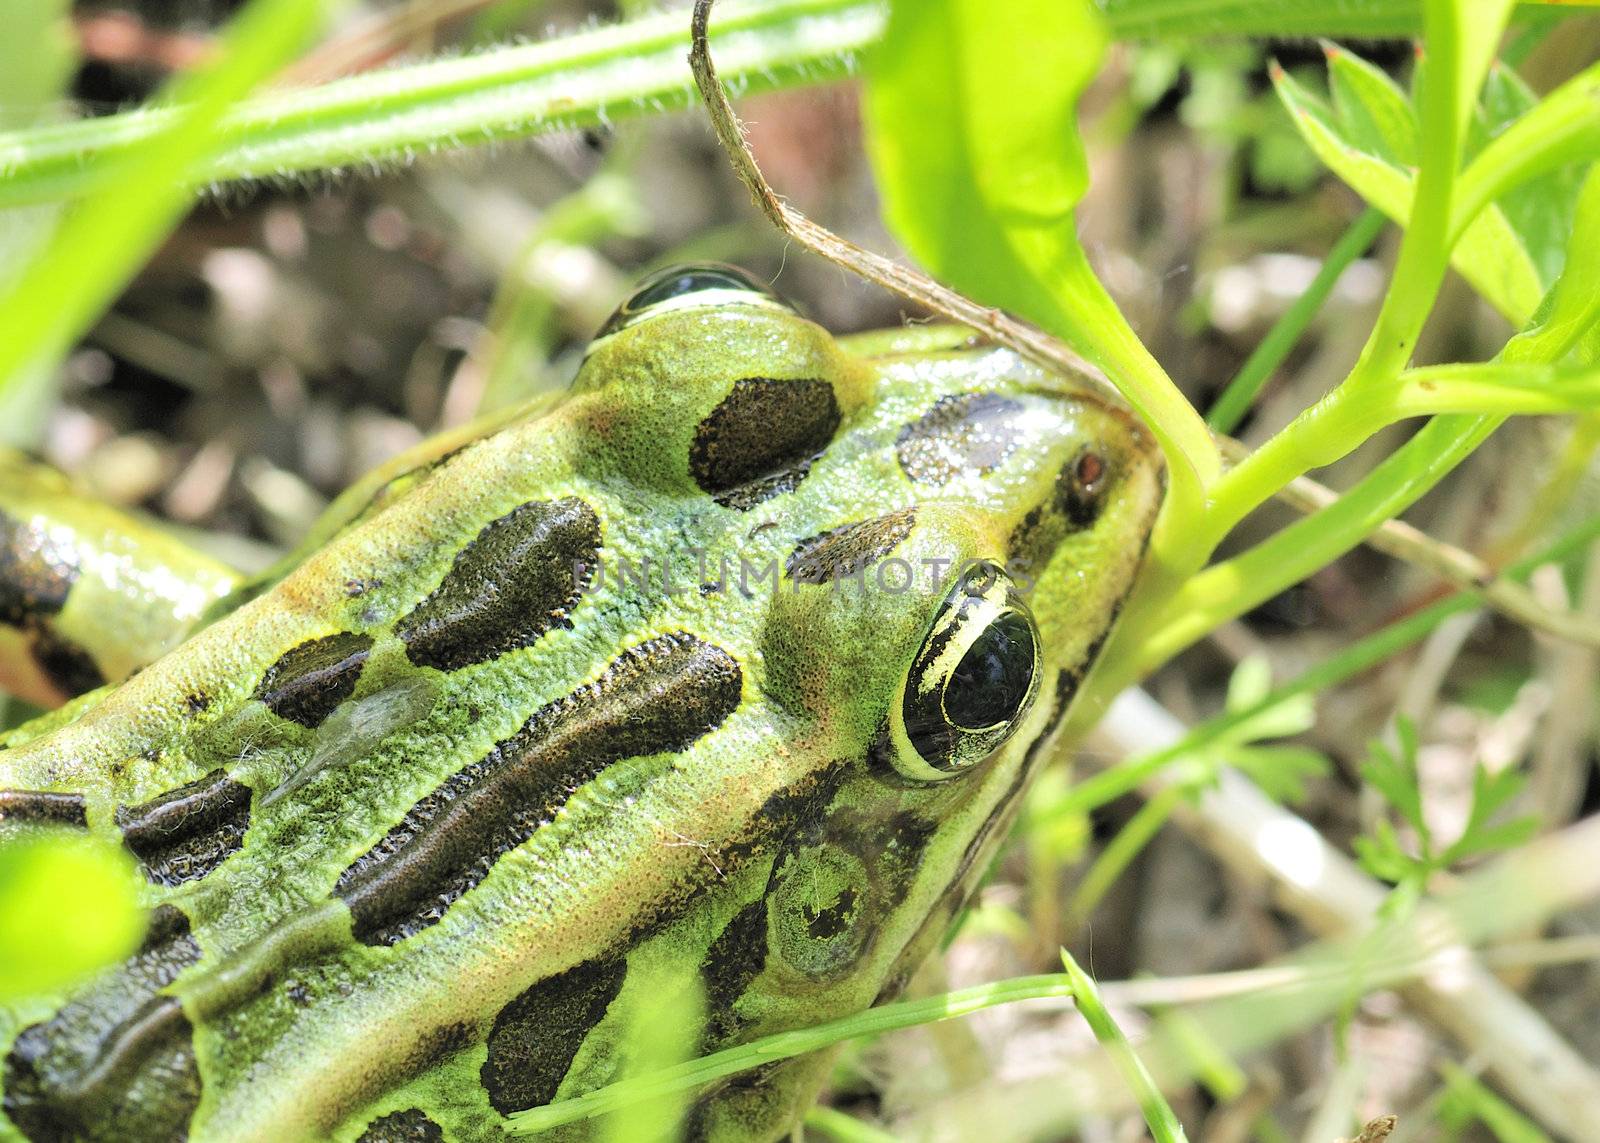 A close-up shot of a leopard frog in the grass.